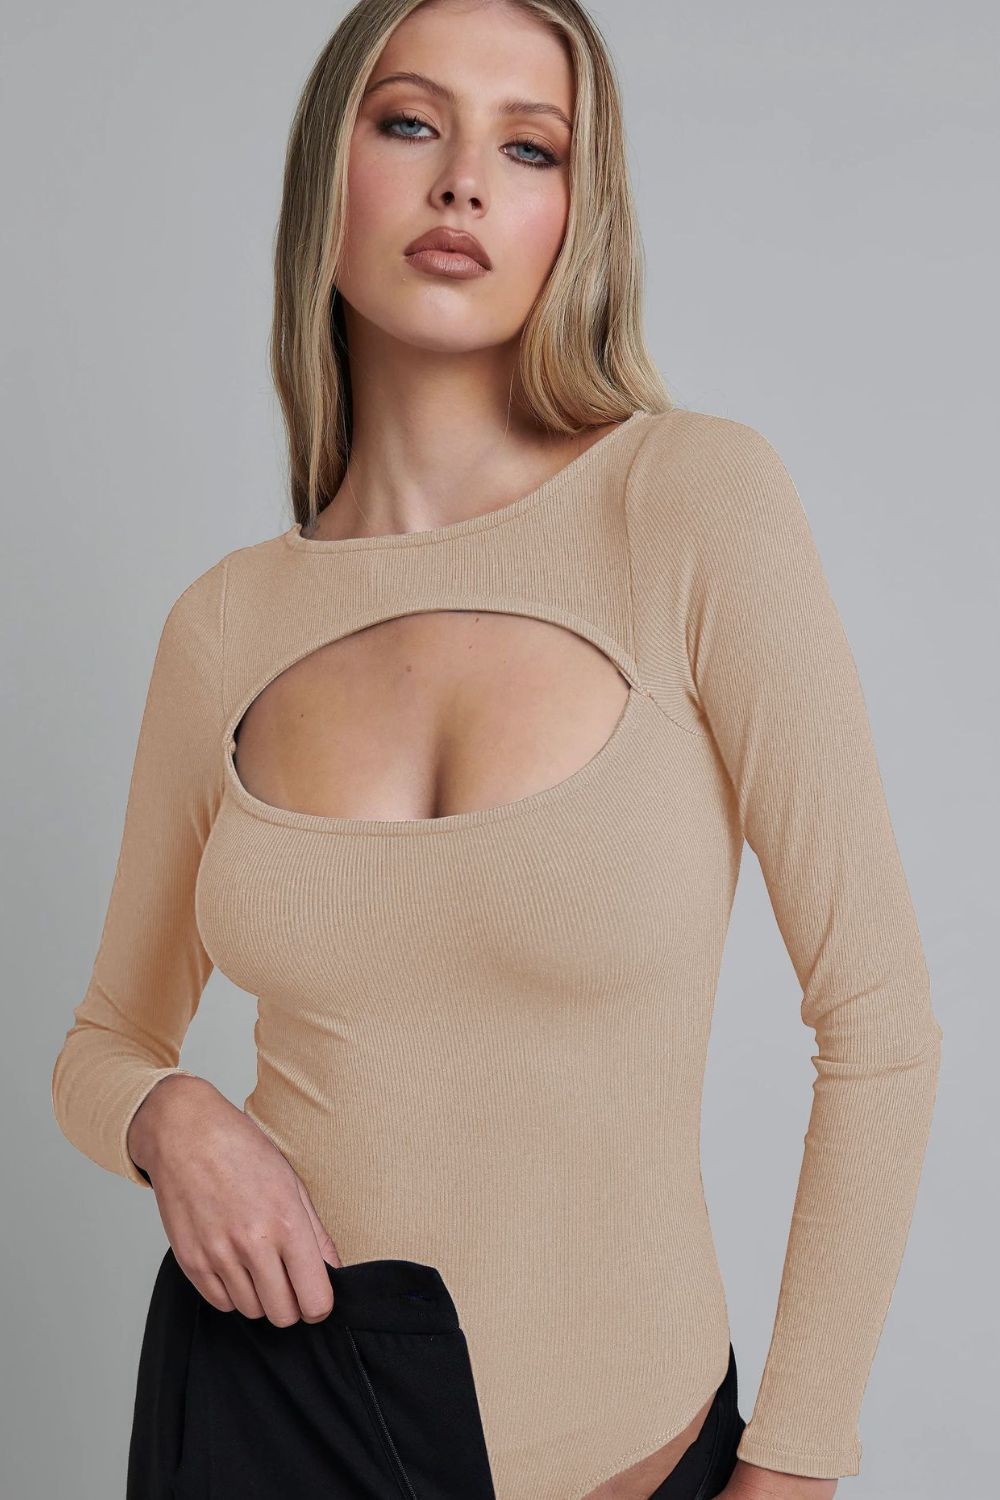 Crown Jewel Bodysuit - Reign in Romance with our Luxuriously Soft Ribbed Long Sleeve Piece - Indulge in the Regal Feel of Feminine Elegance. - Guy Christopher